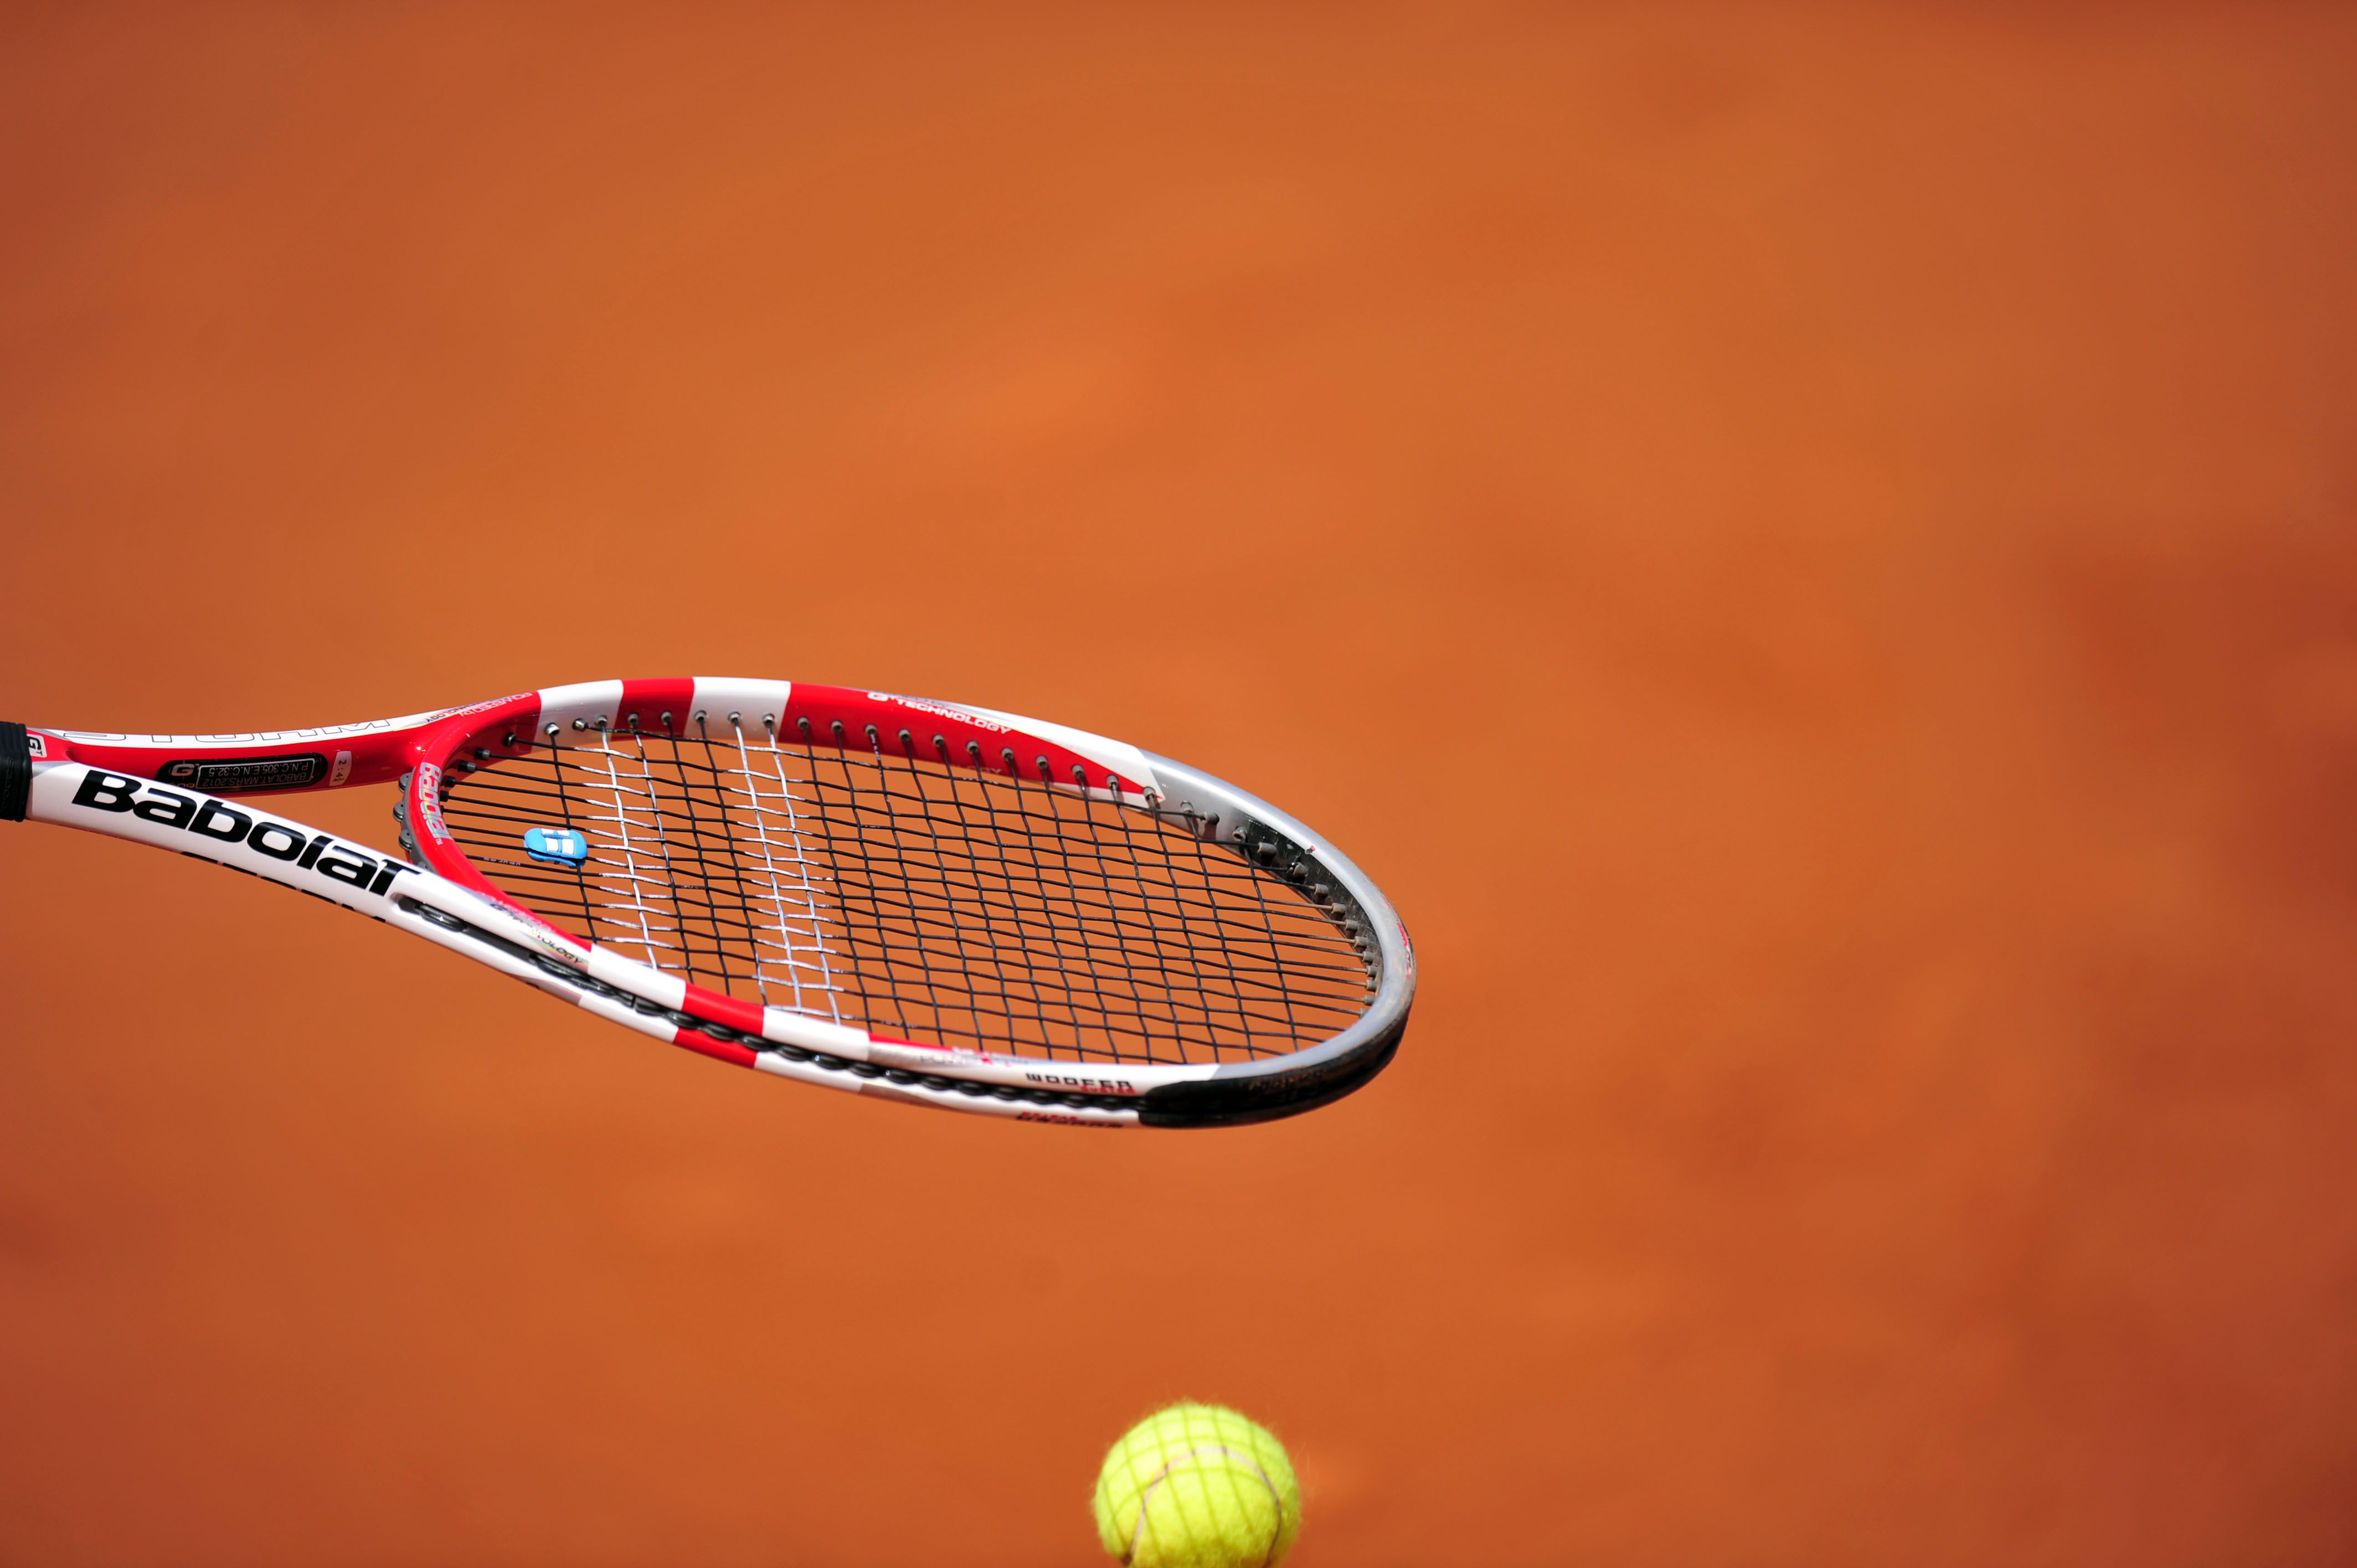 12+ Roland Garros Tennis French Open Images the cc beans